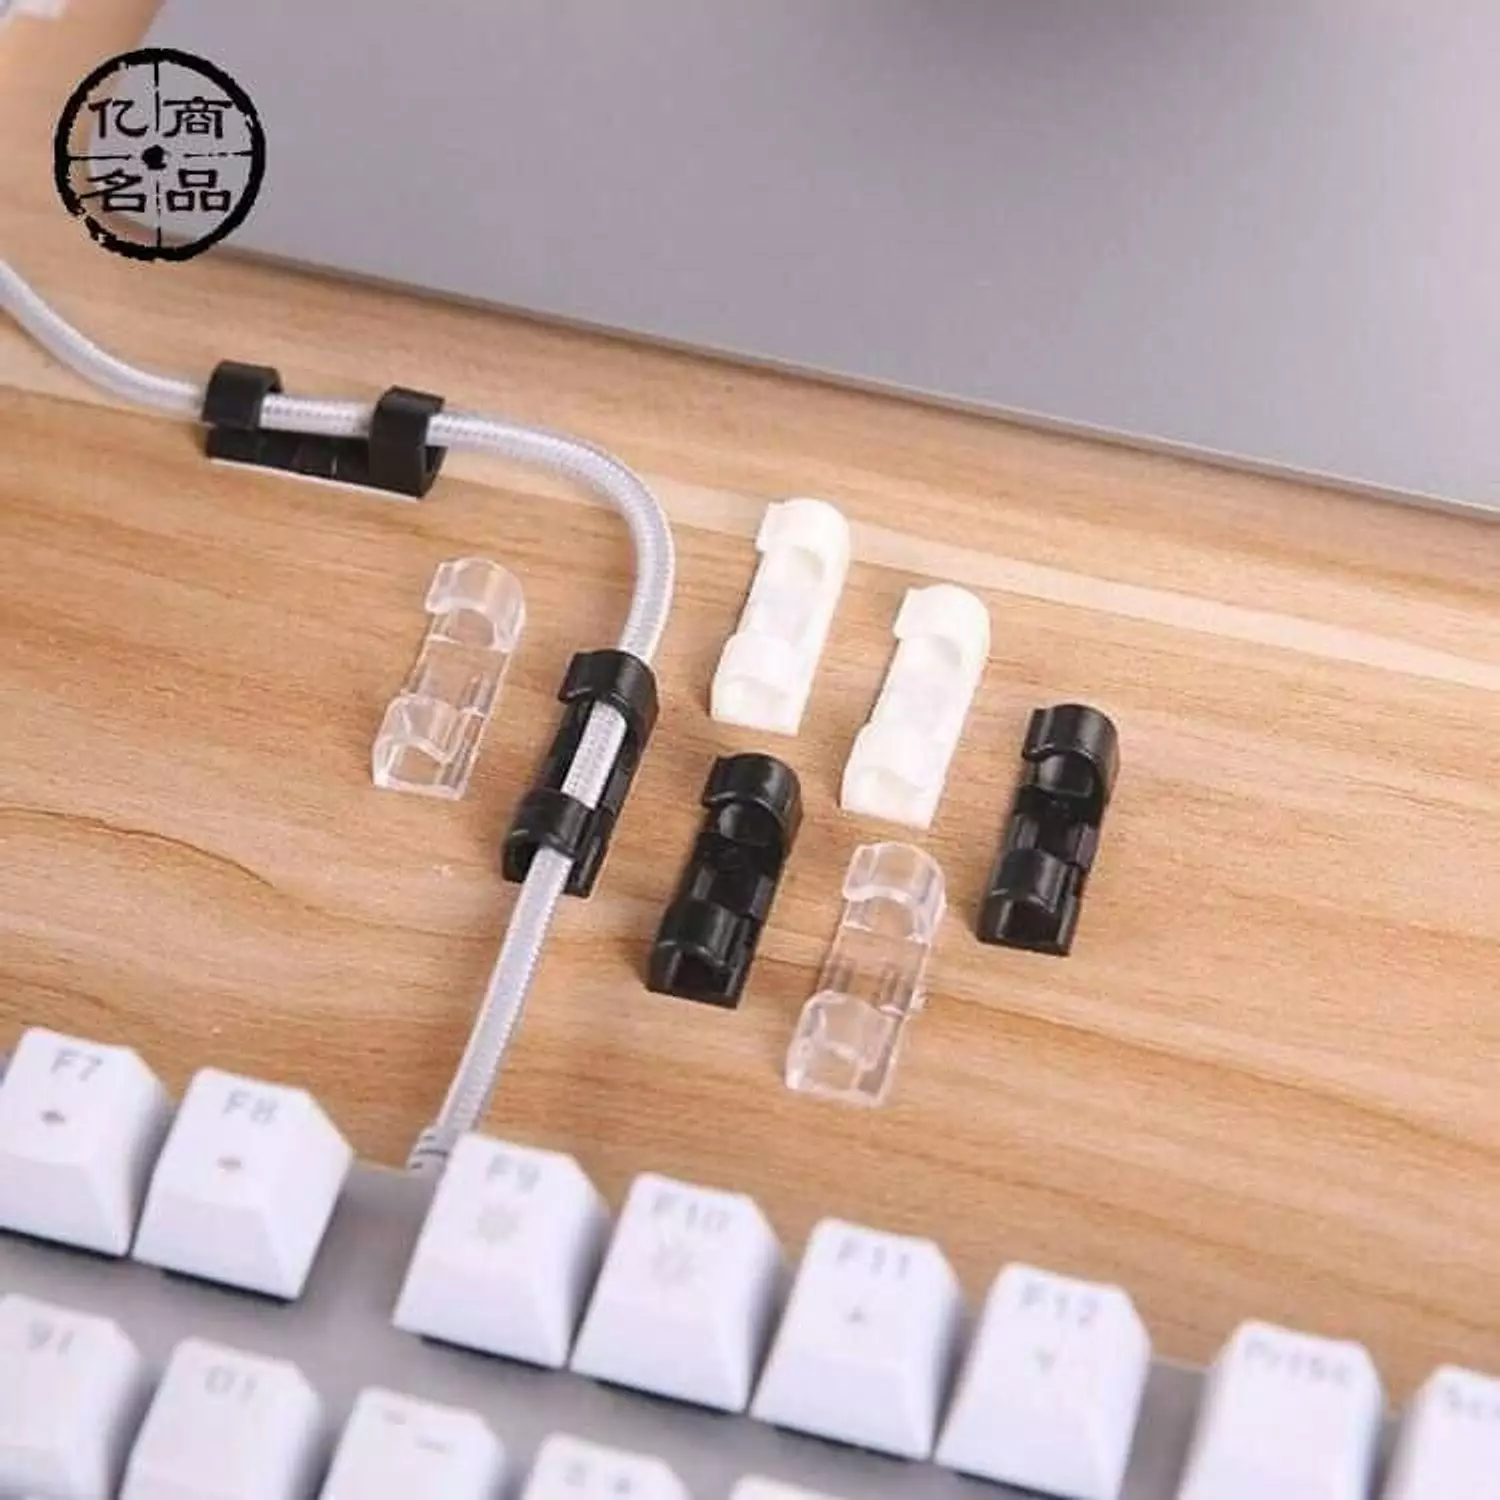 Self-Adhesive Cable Clips Organizer Drop Wire Holder Cord Management, Pack of 20 hover image